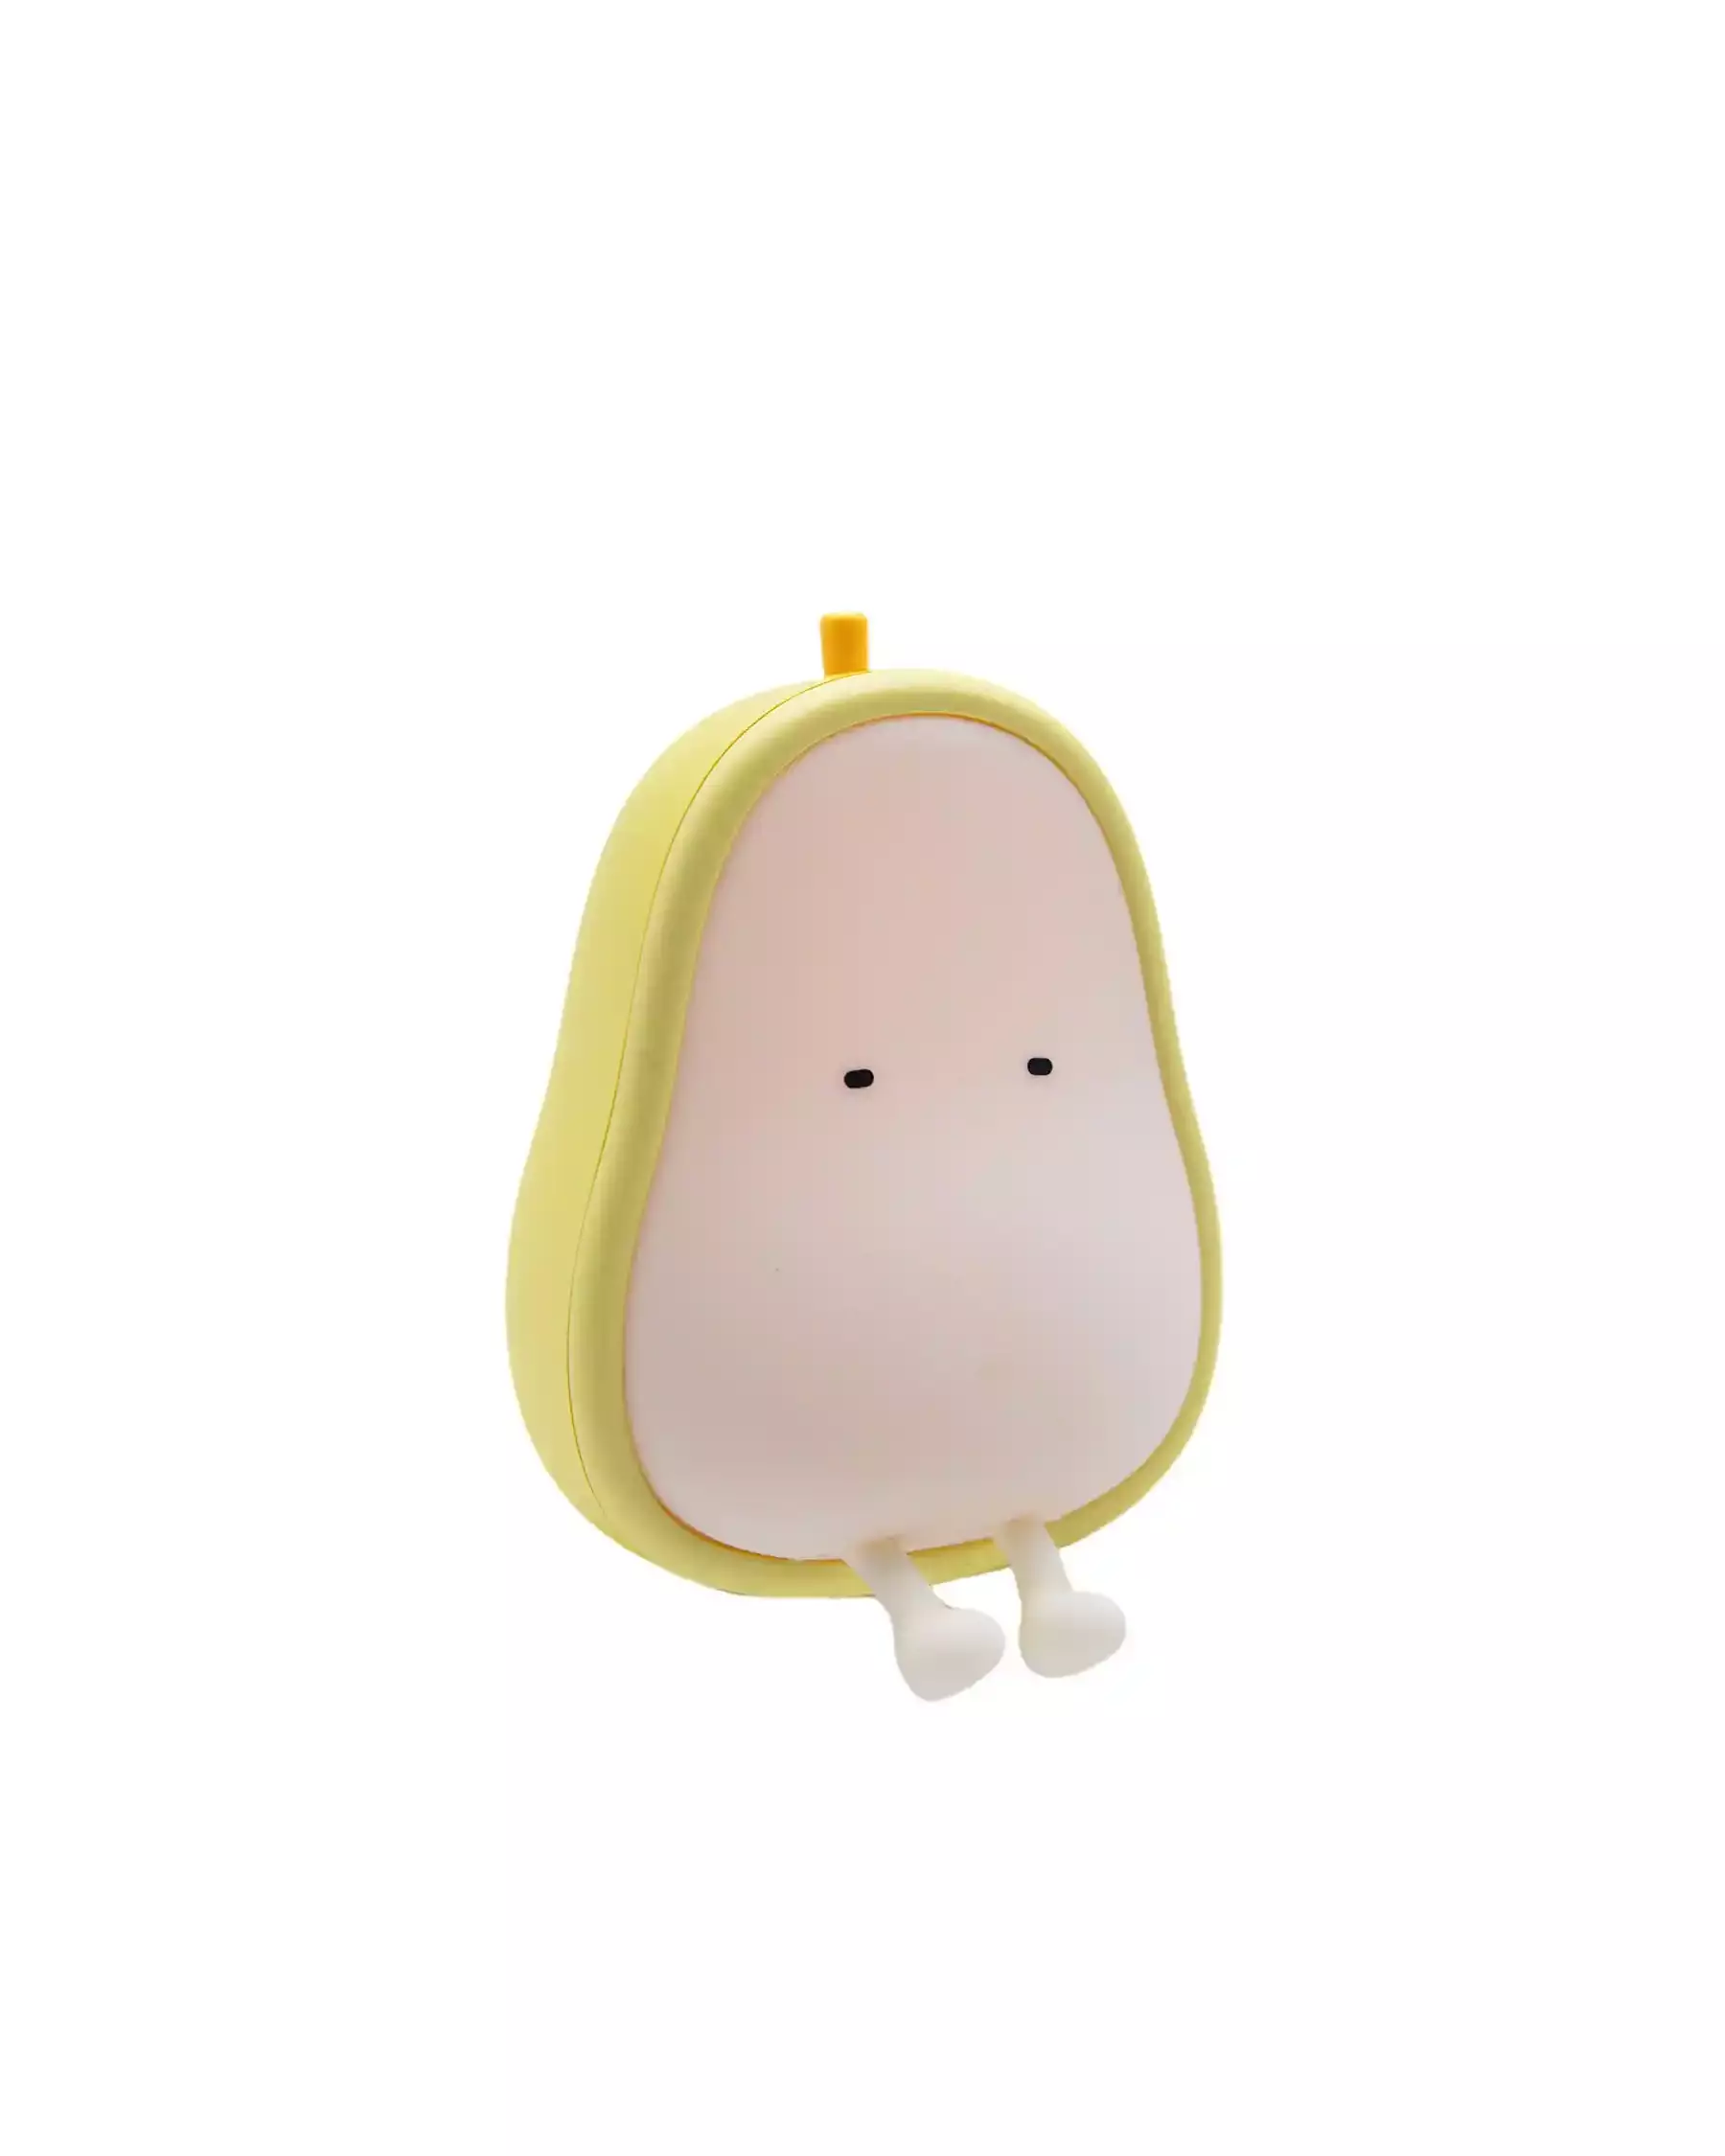 Featured product image of yellow pear night light